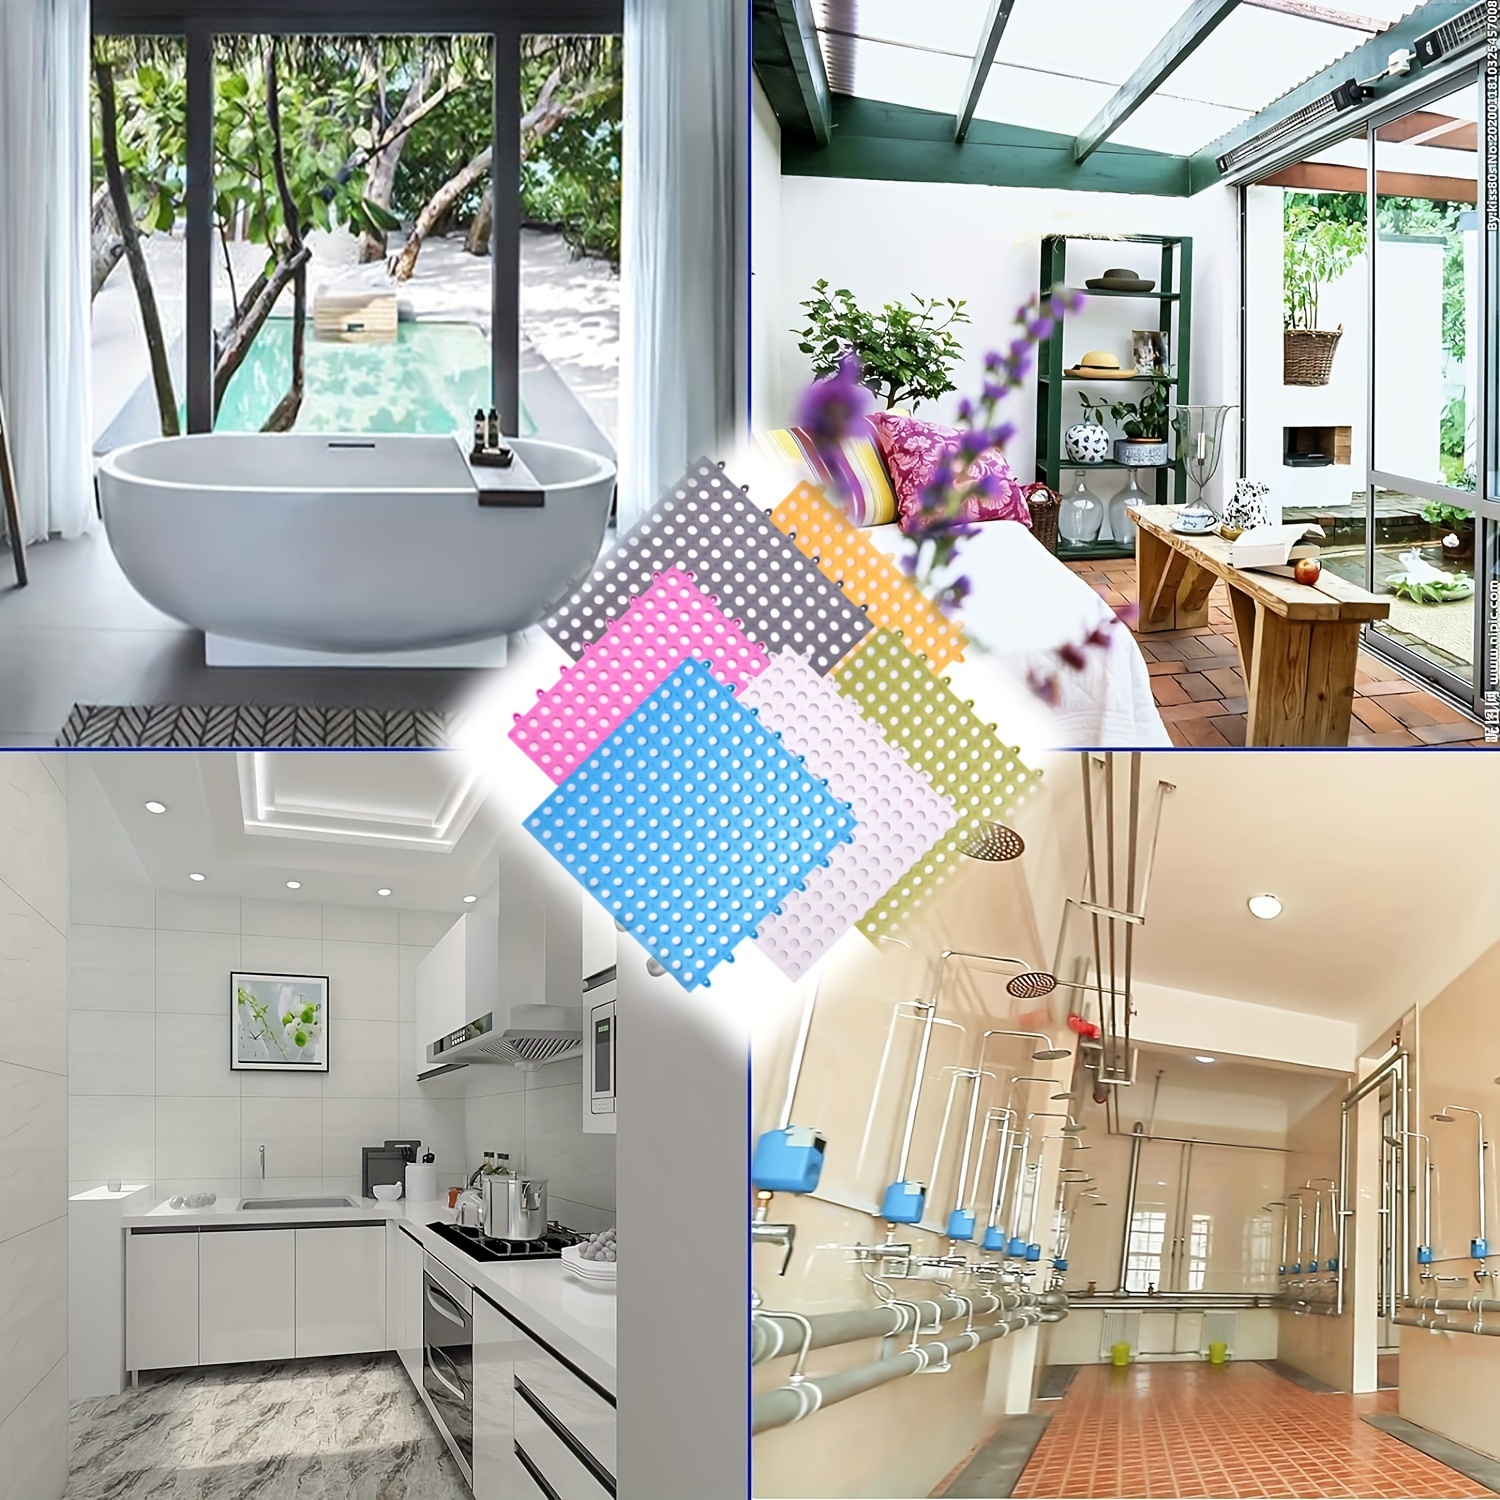 

6pcs Bathroom Non Slip Mat Can Be Spliced And Cut, Shower Floor Mat Can Be Fully Spread, Toilet, Bathroom, Household Waterproof Foot Mat For Restaurant